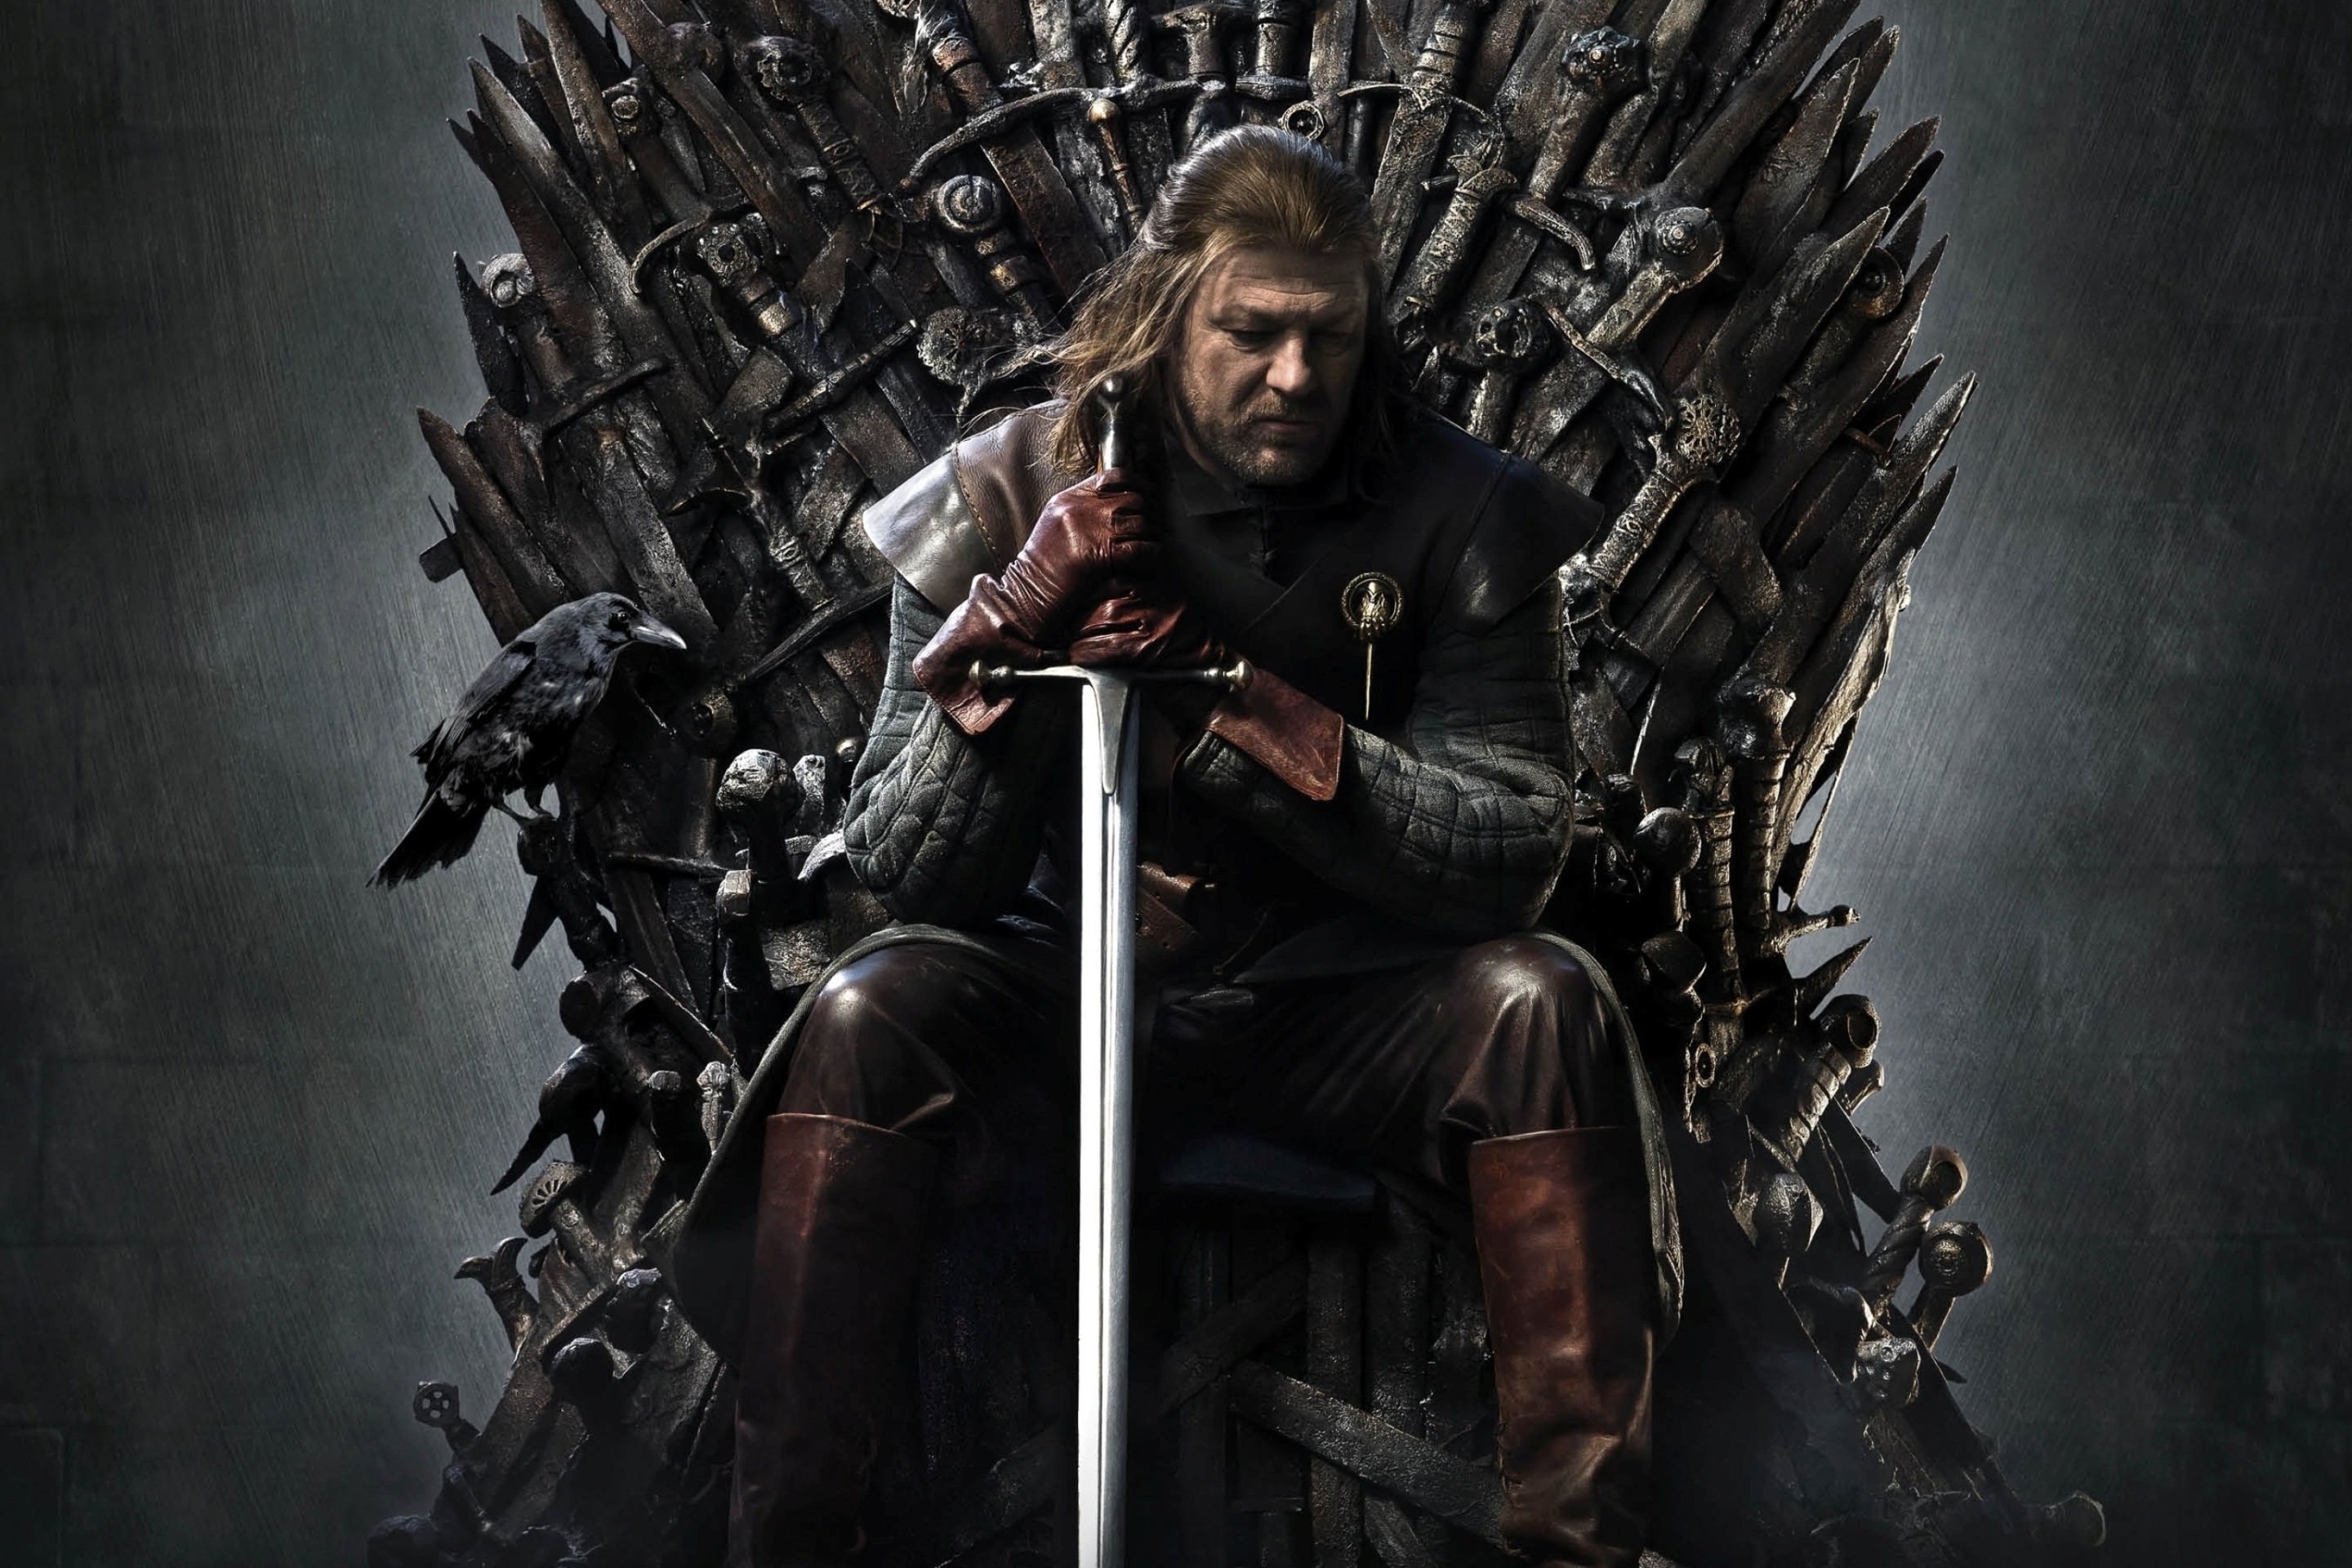 Обои Game Of Thrones A Song of Ice and Fire with Ned Star 2880x1920